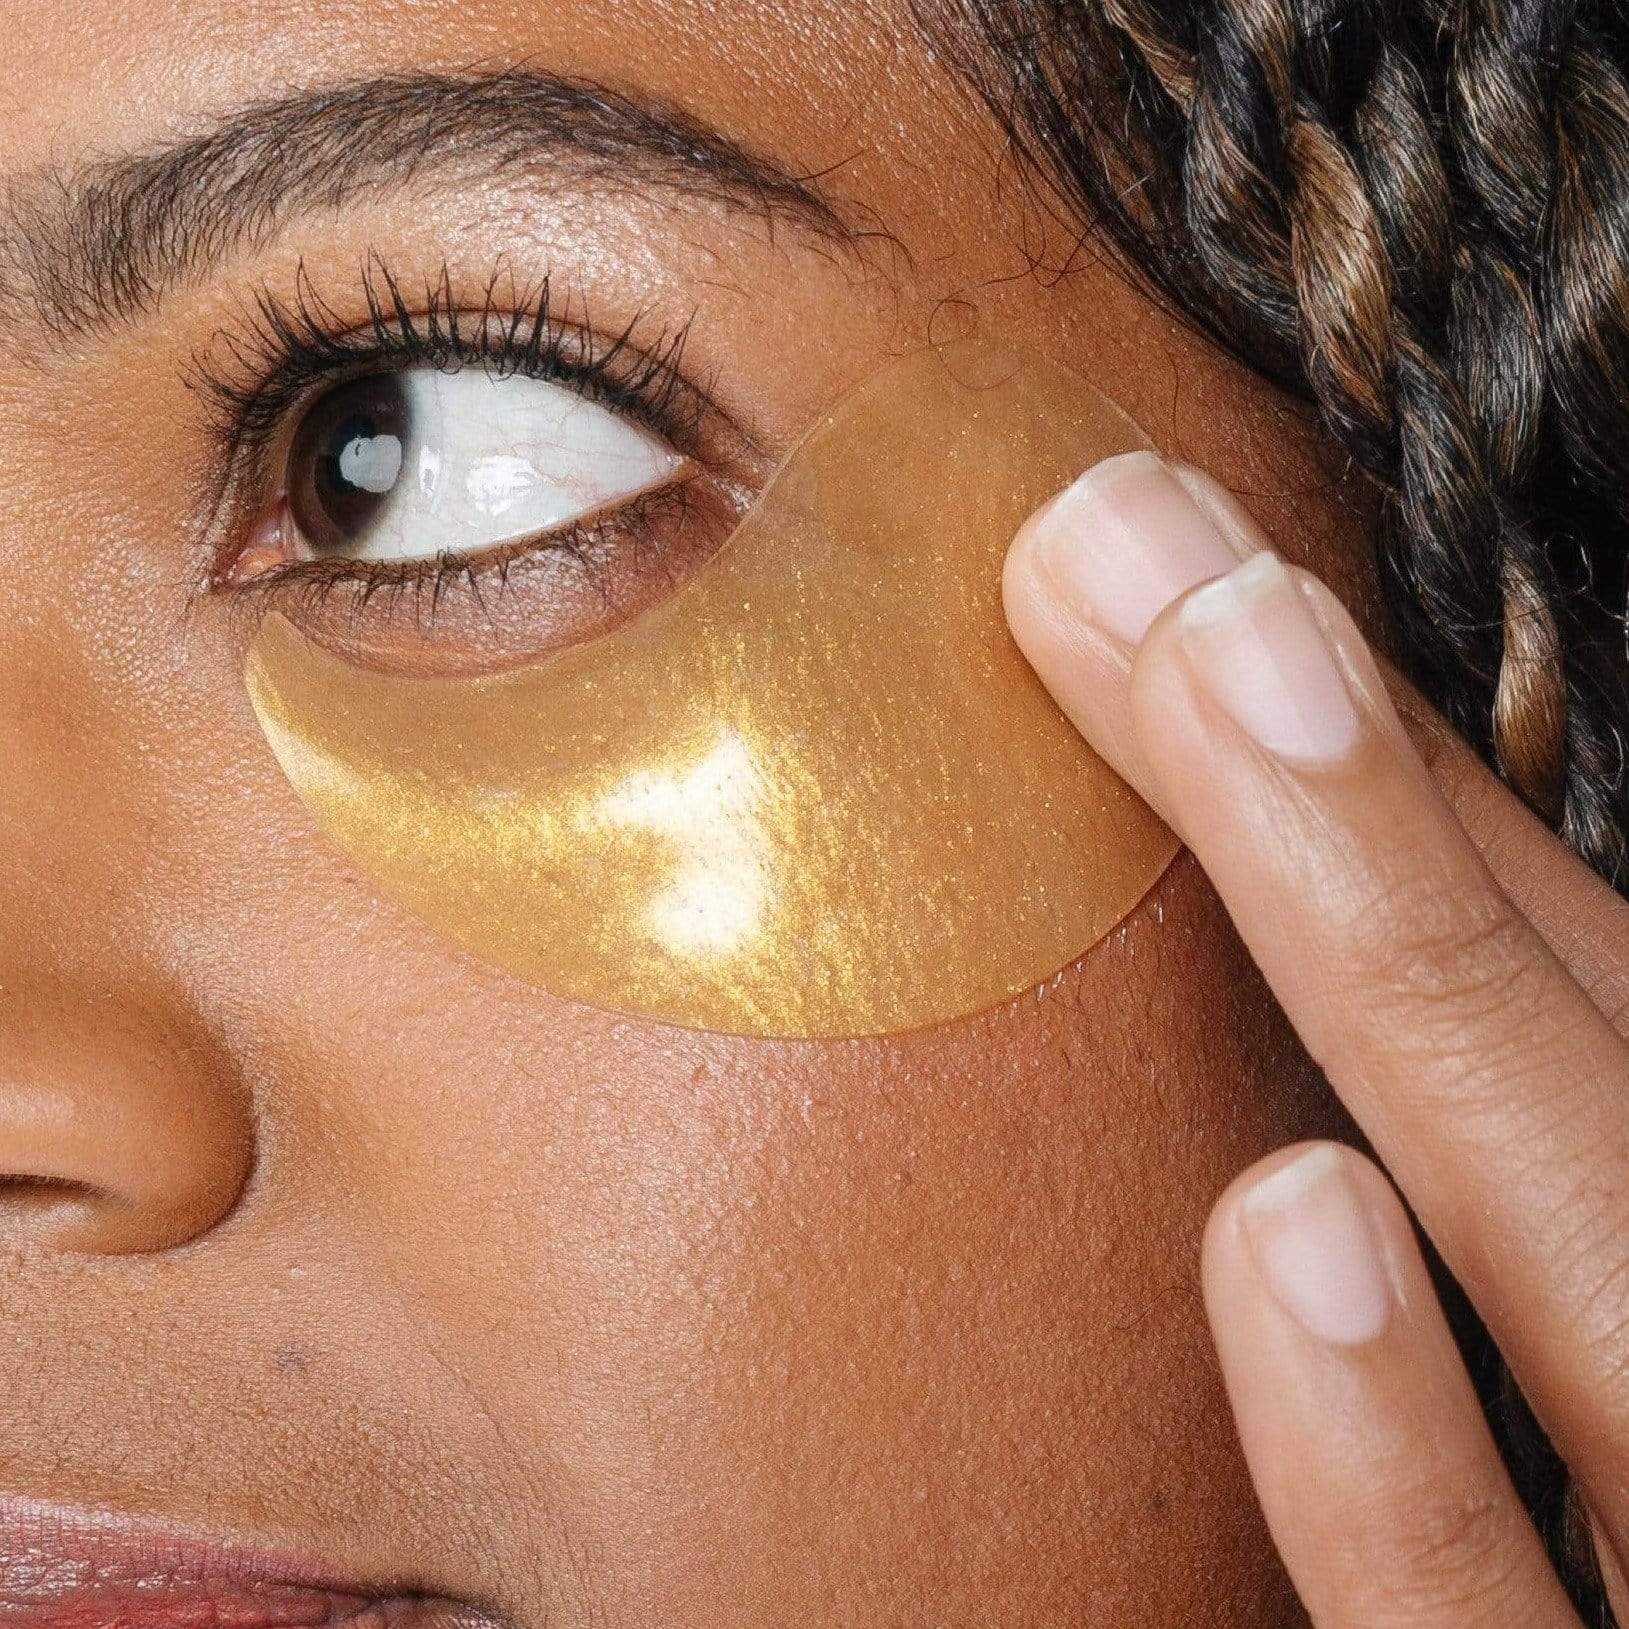 Soon Skincare Eye patches Golden Eye 24K Gold Hydrogel Eye Patches